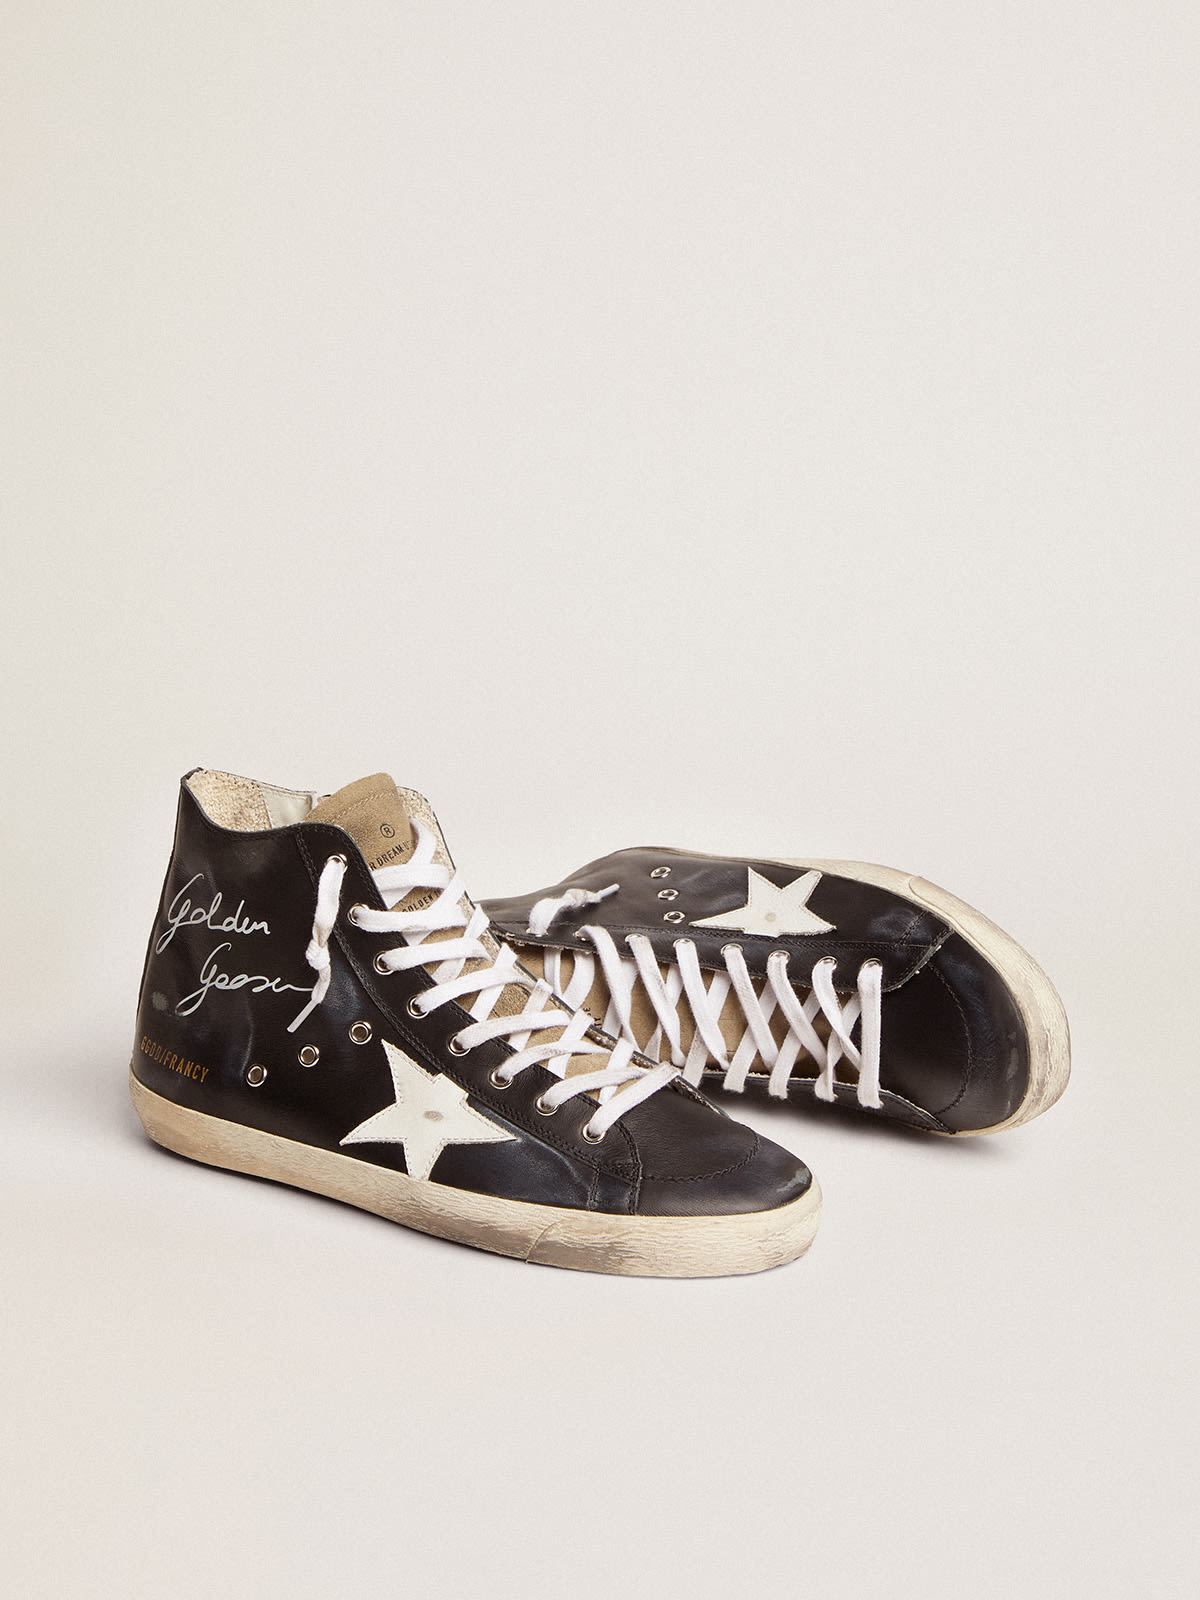 Golden Goose - Men's Francy with black leather upper and white leather star in 